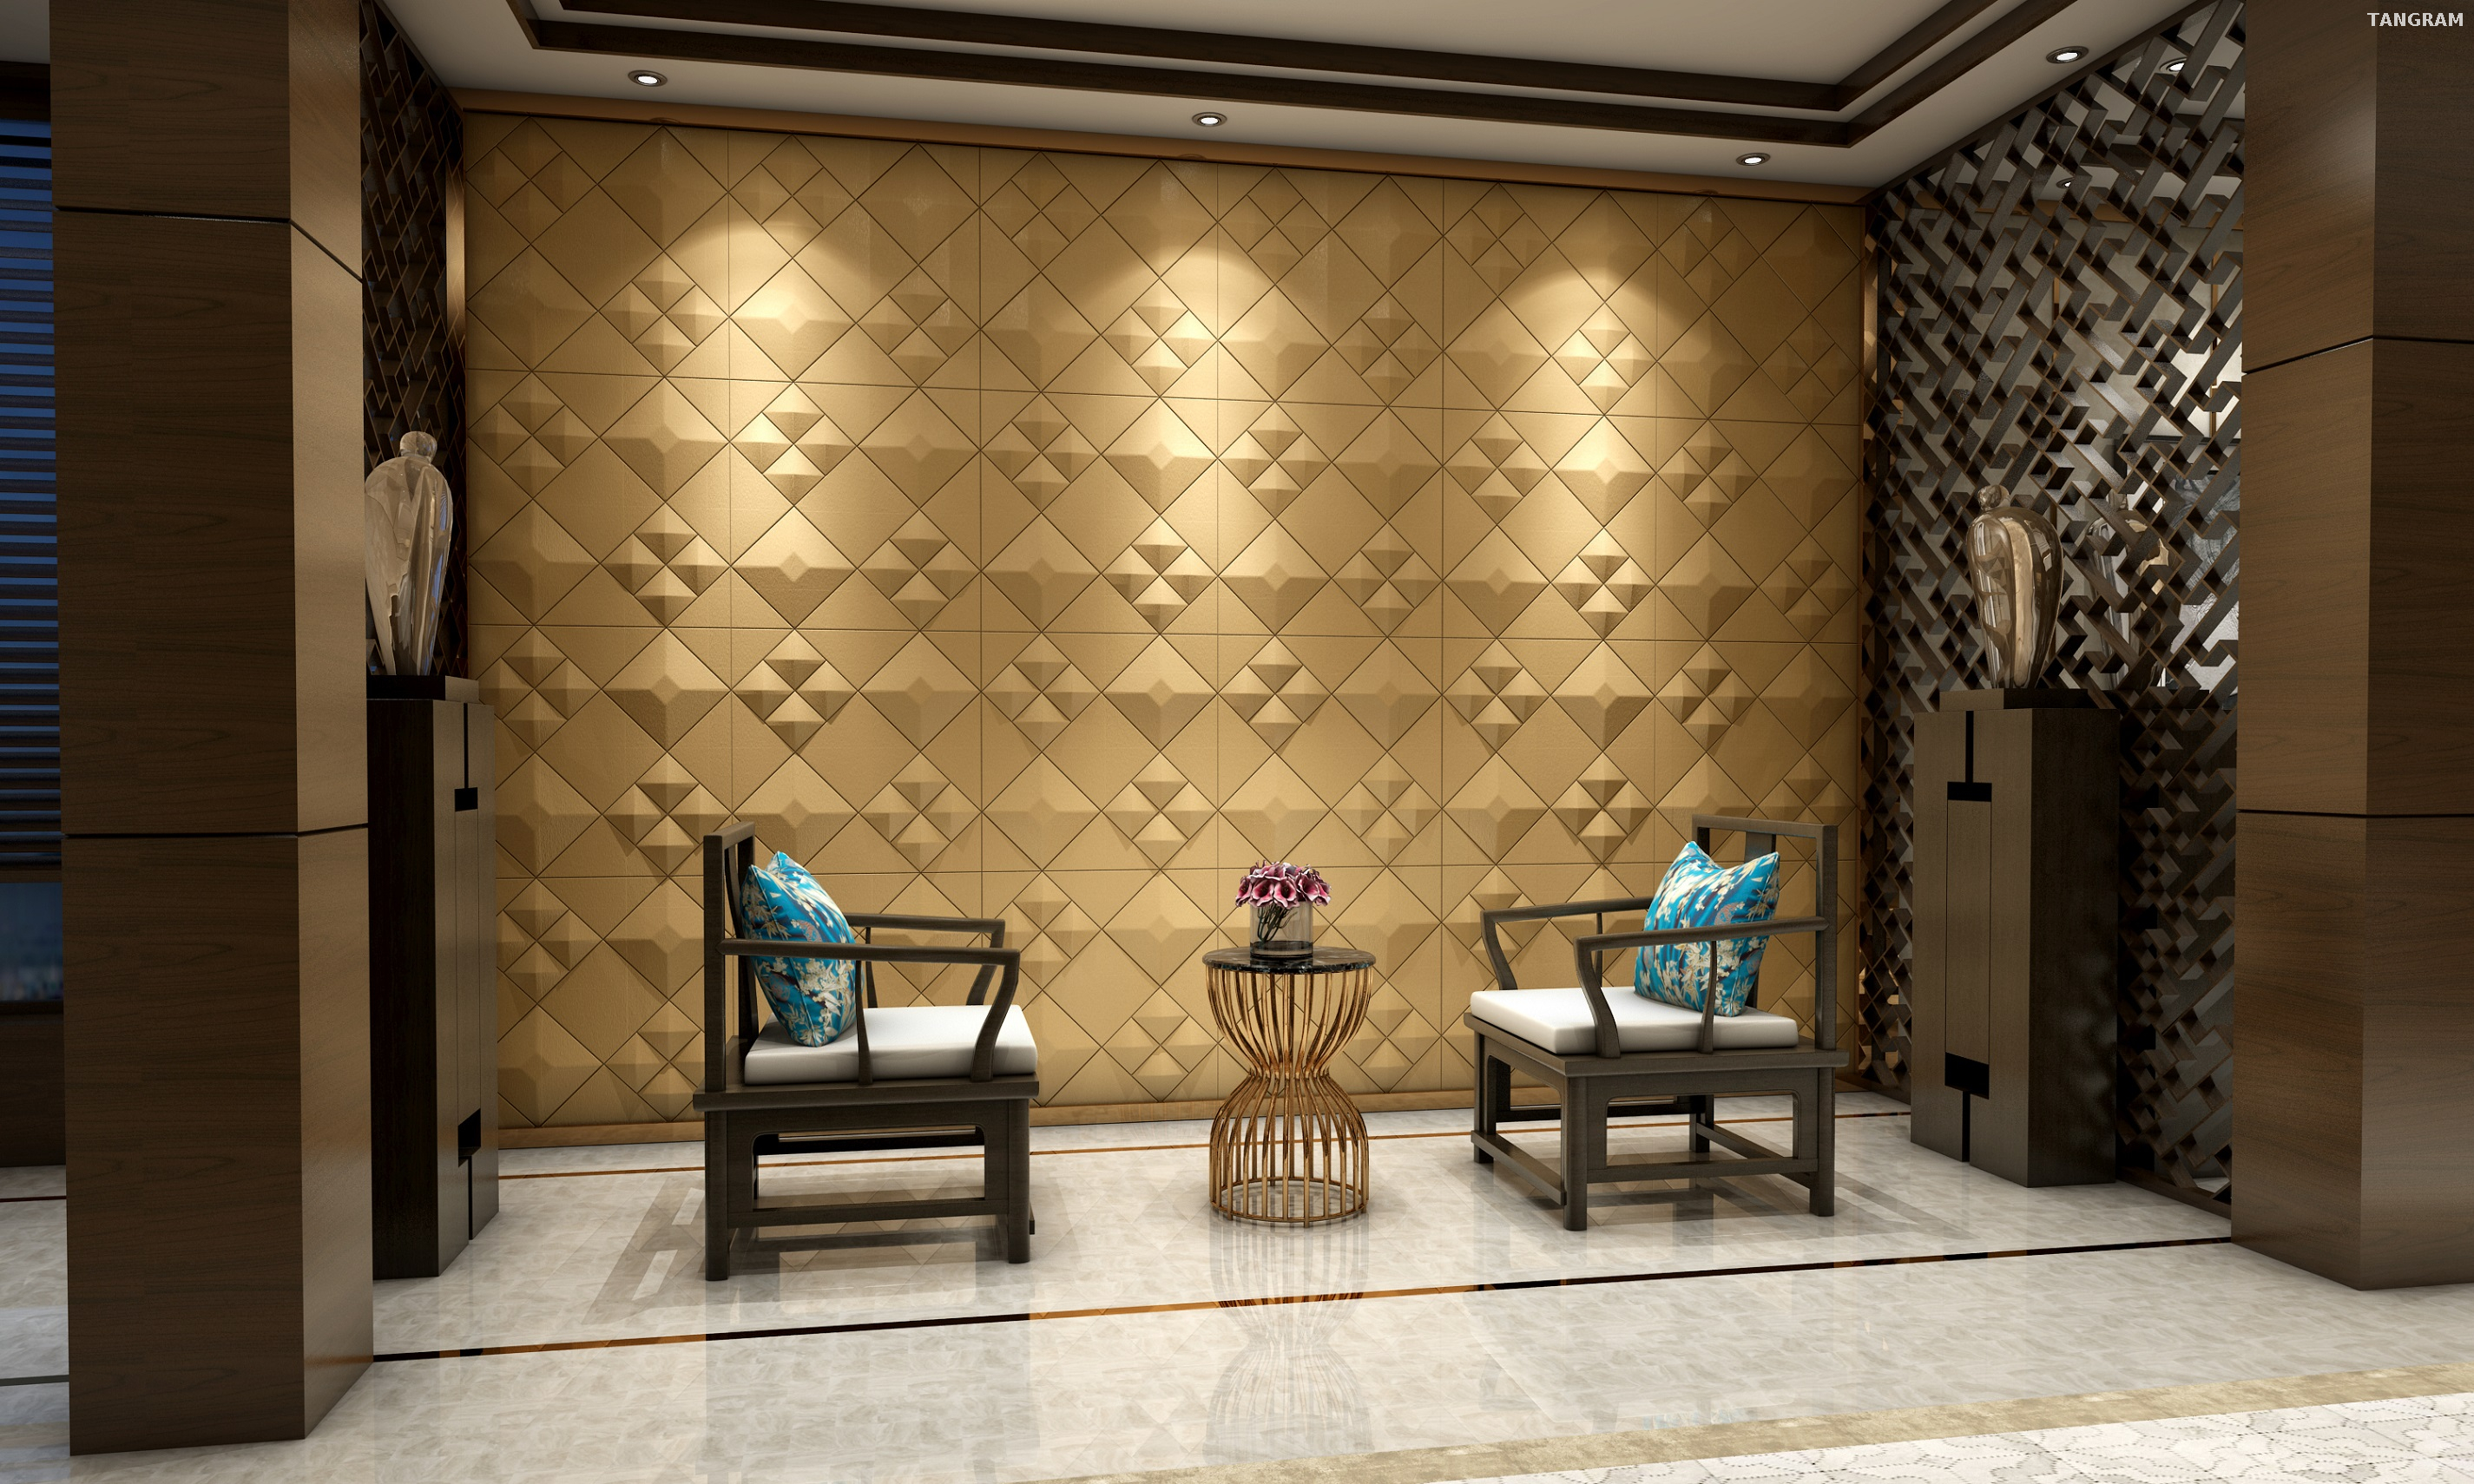 Square Tile Golden 3D Wall Panel